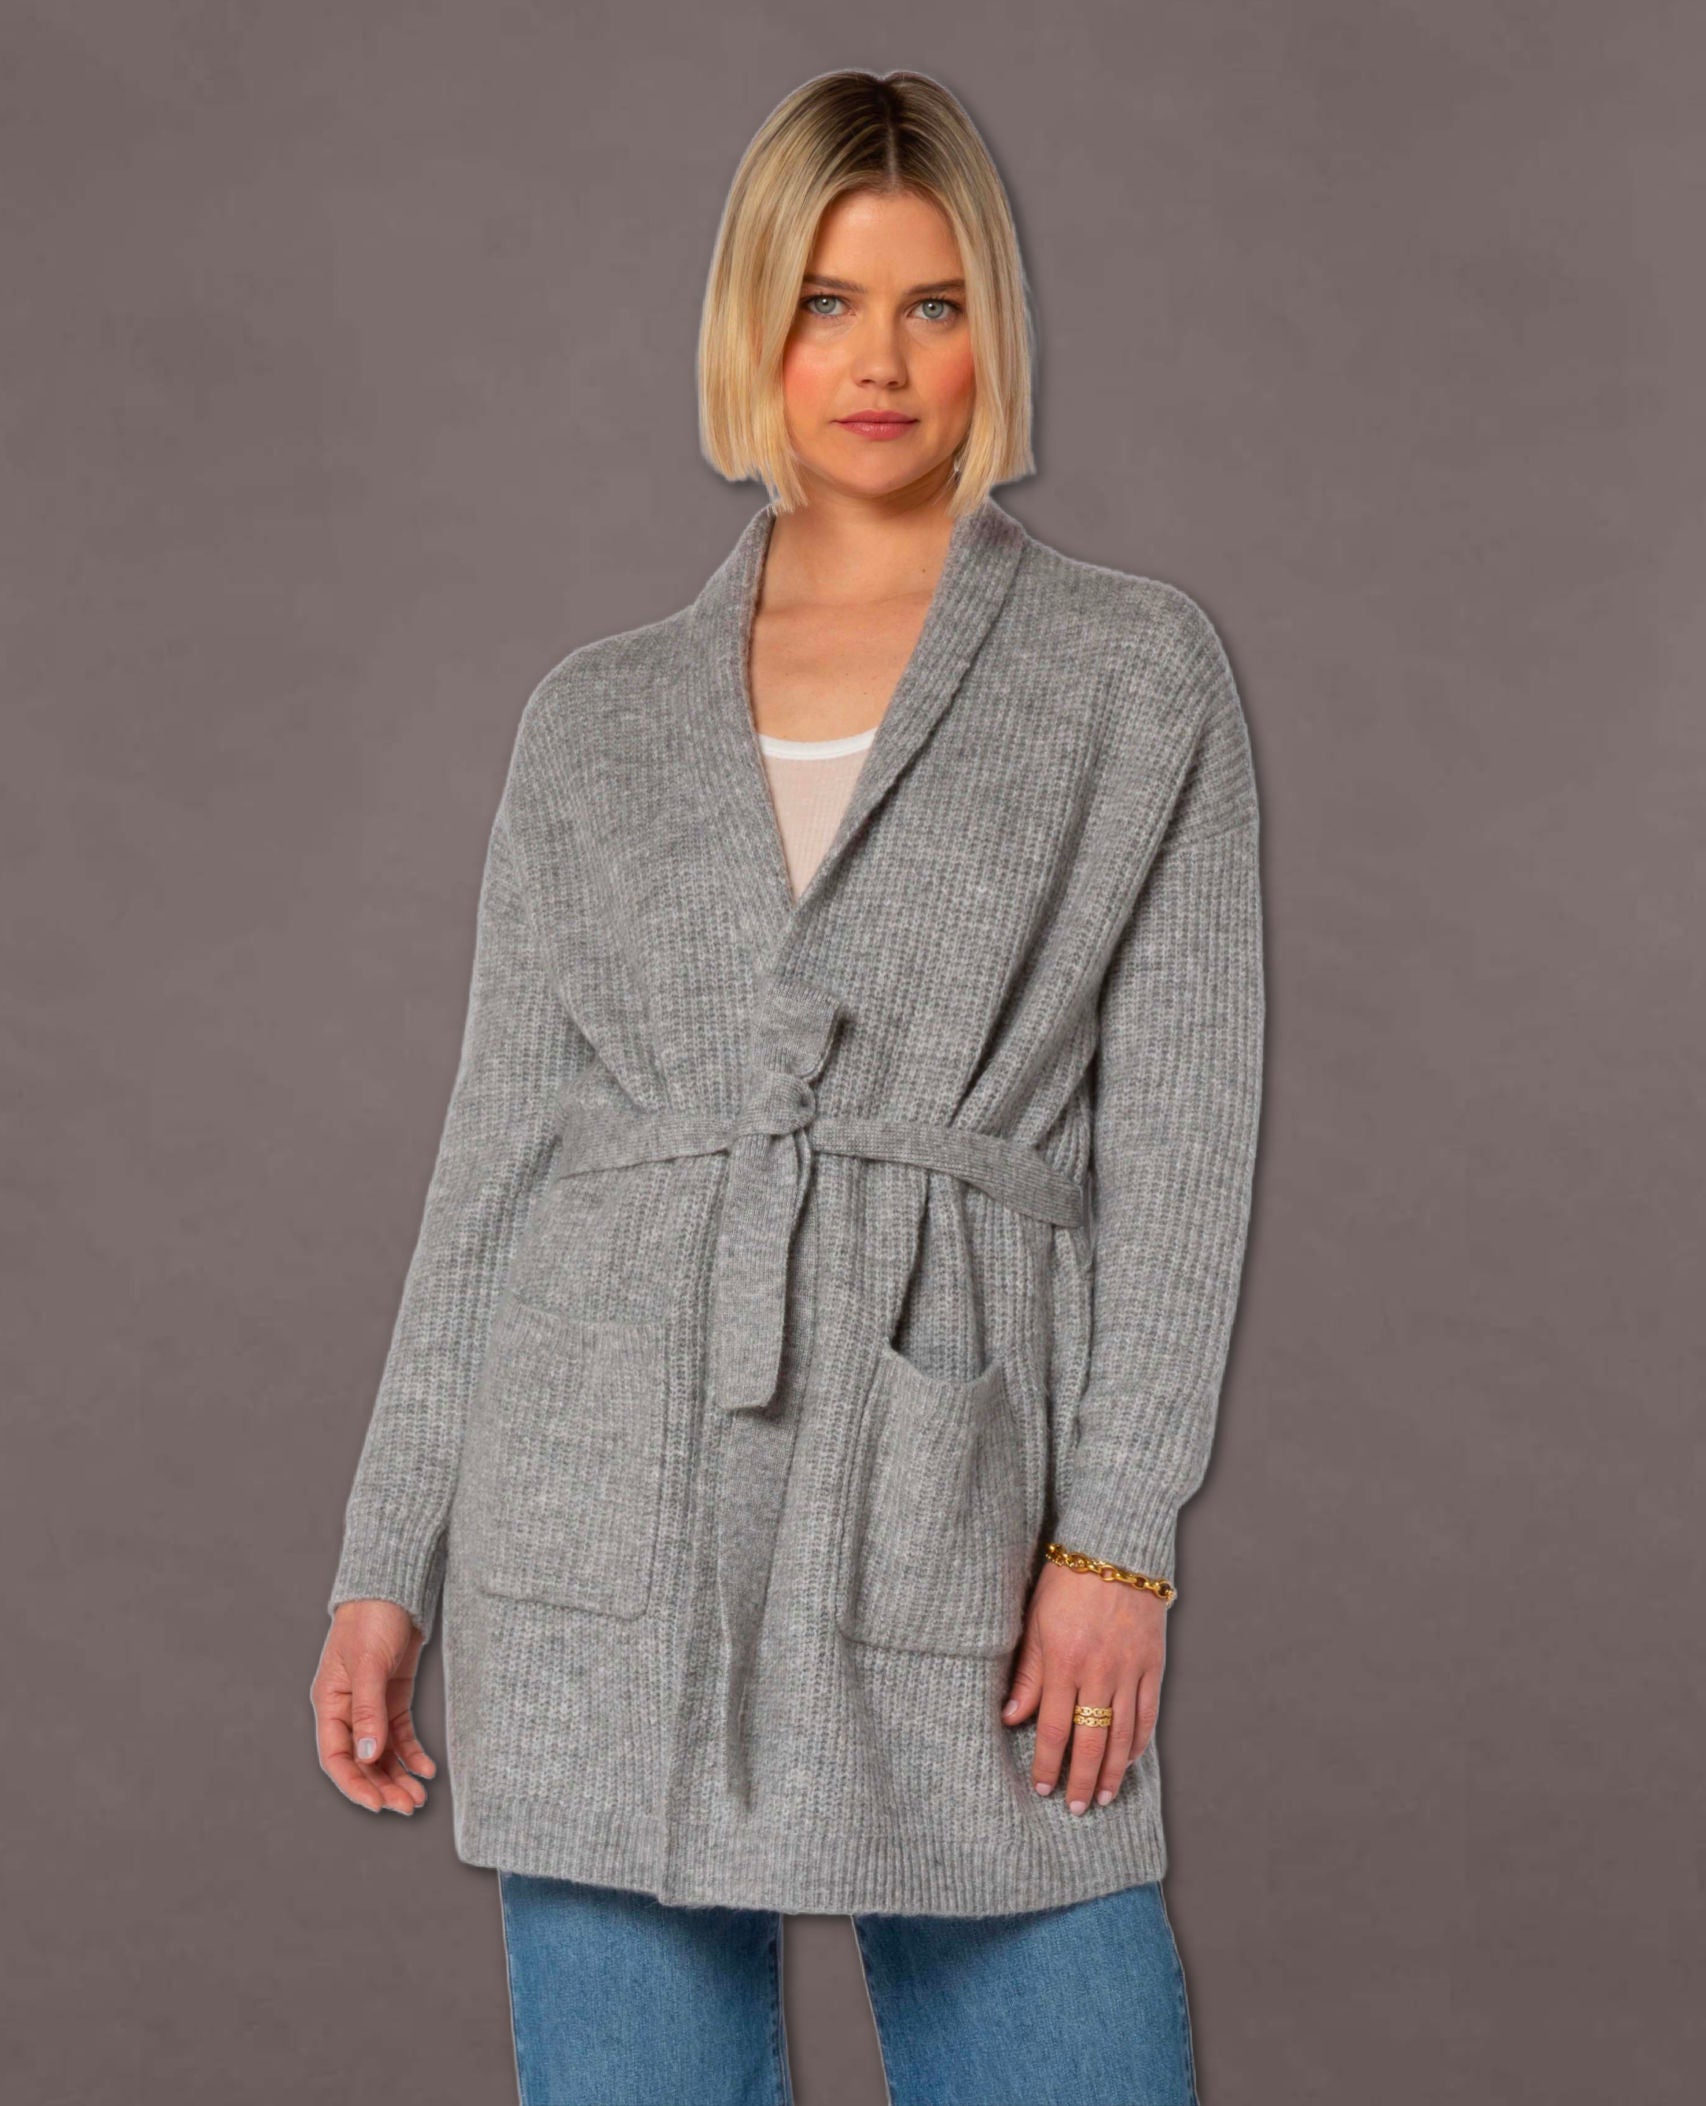 Landon Long Sleeve Open Cardigan Sweater with Tie Belt and Patch Pockets